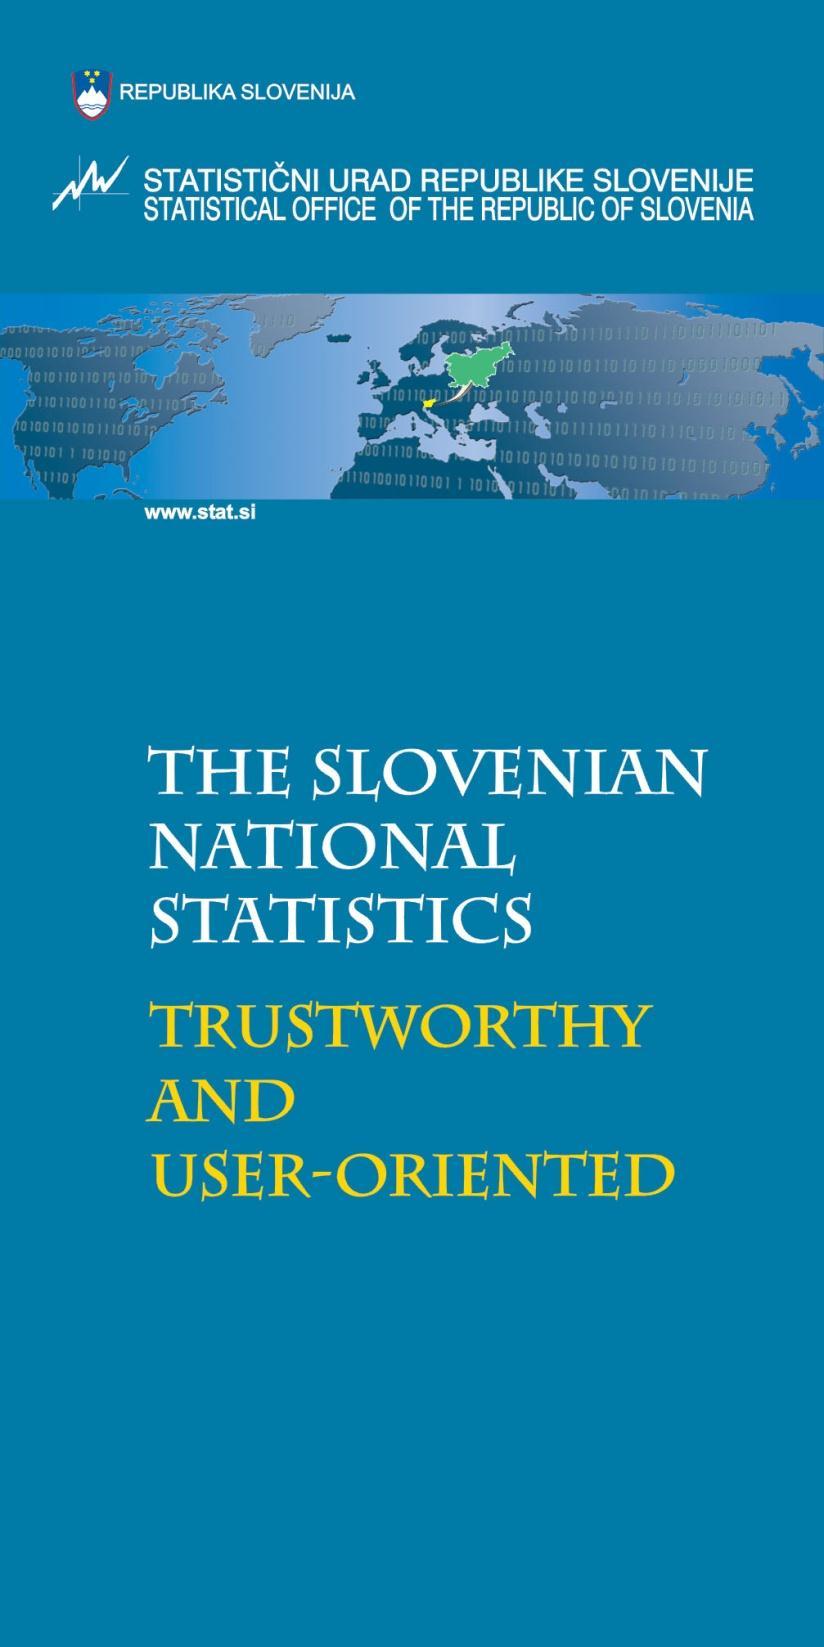 Establishment of the Statistical Business Register at SORS and